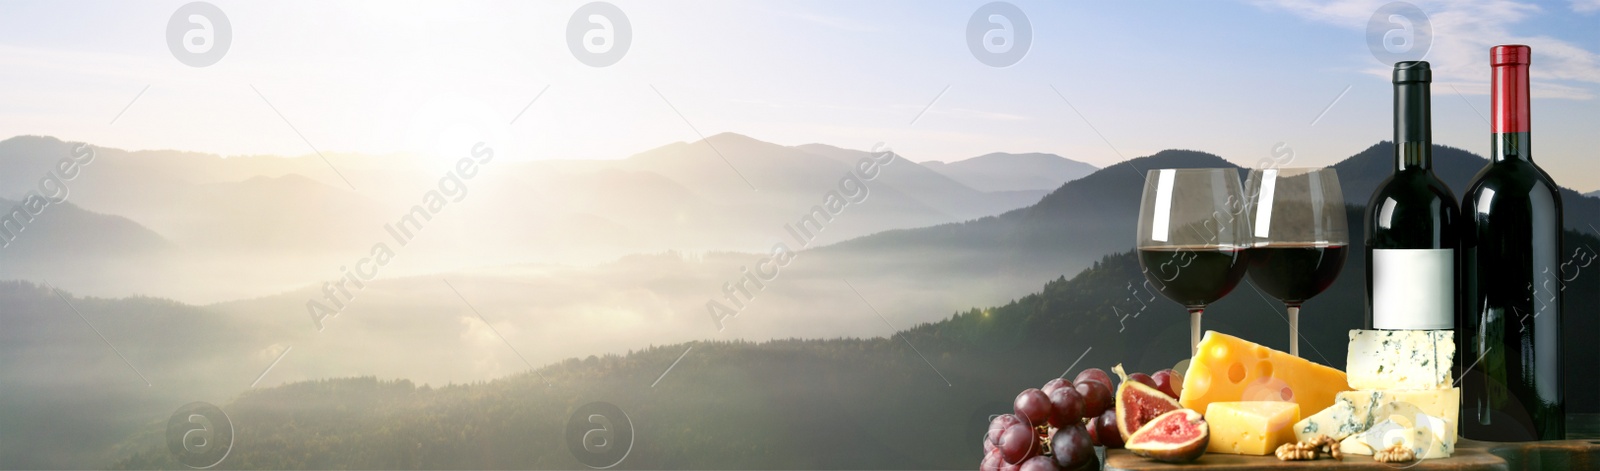 Image of Tasty wine, grapes and cheeses on wooden table against beautiful mountain landscape, space for text. Banner design